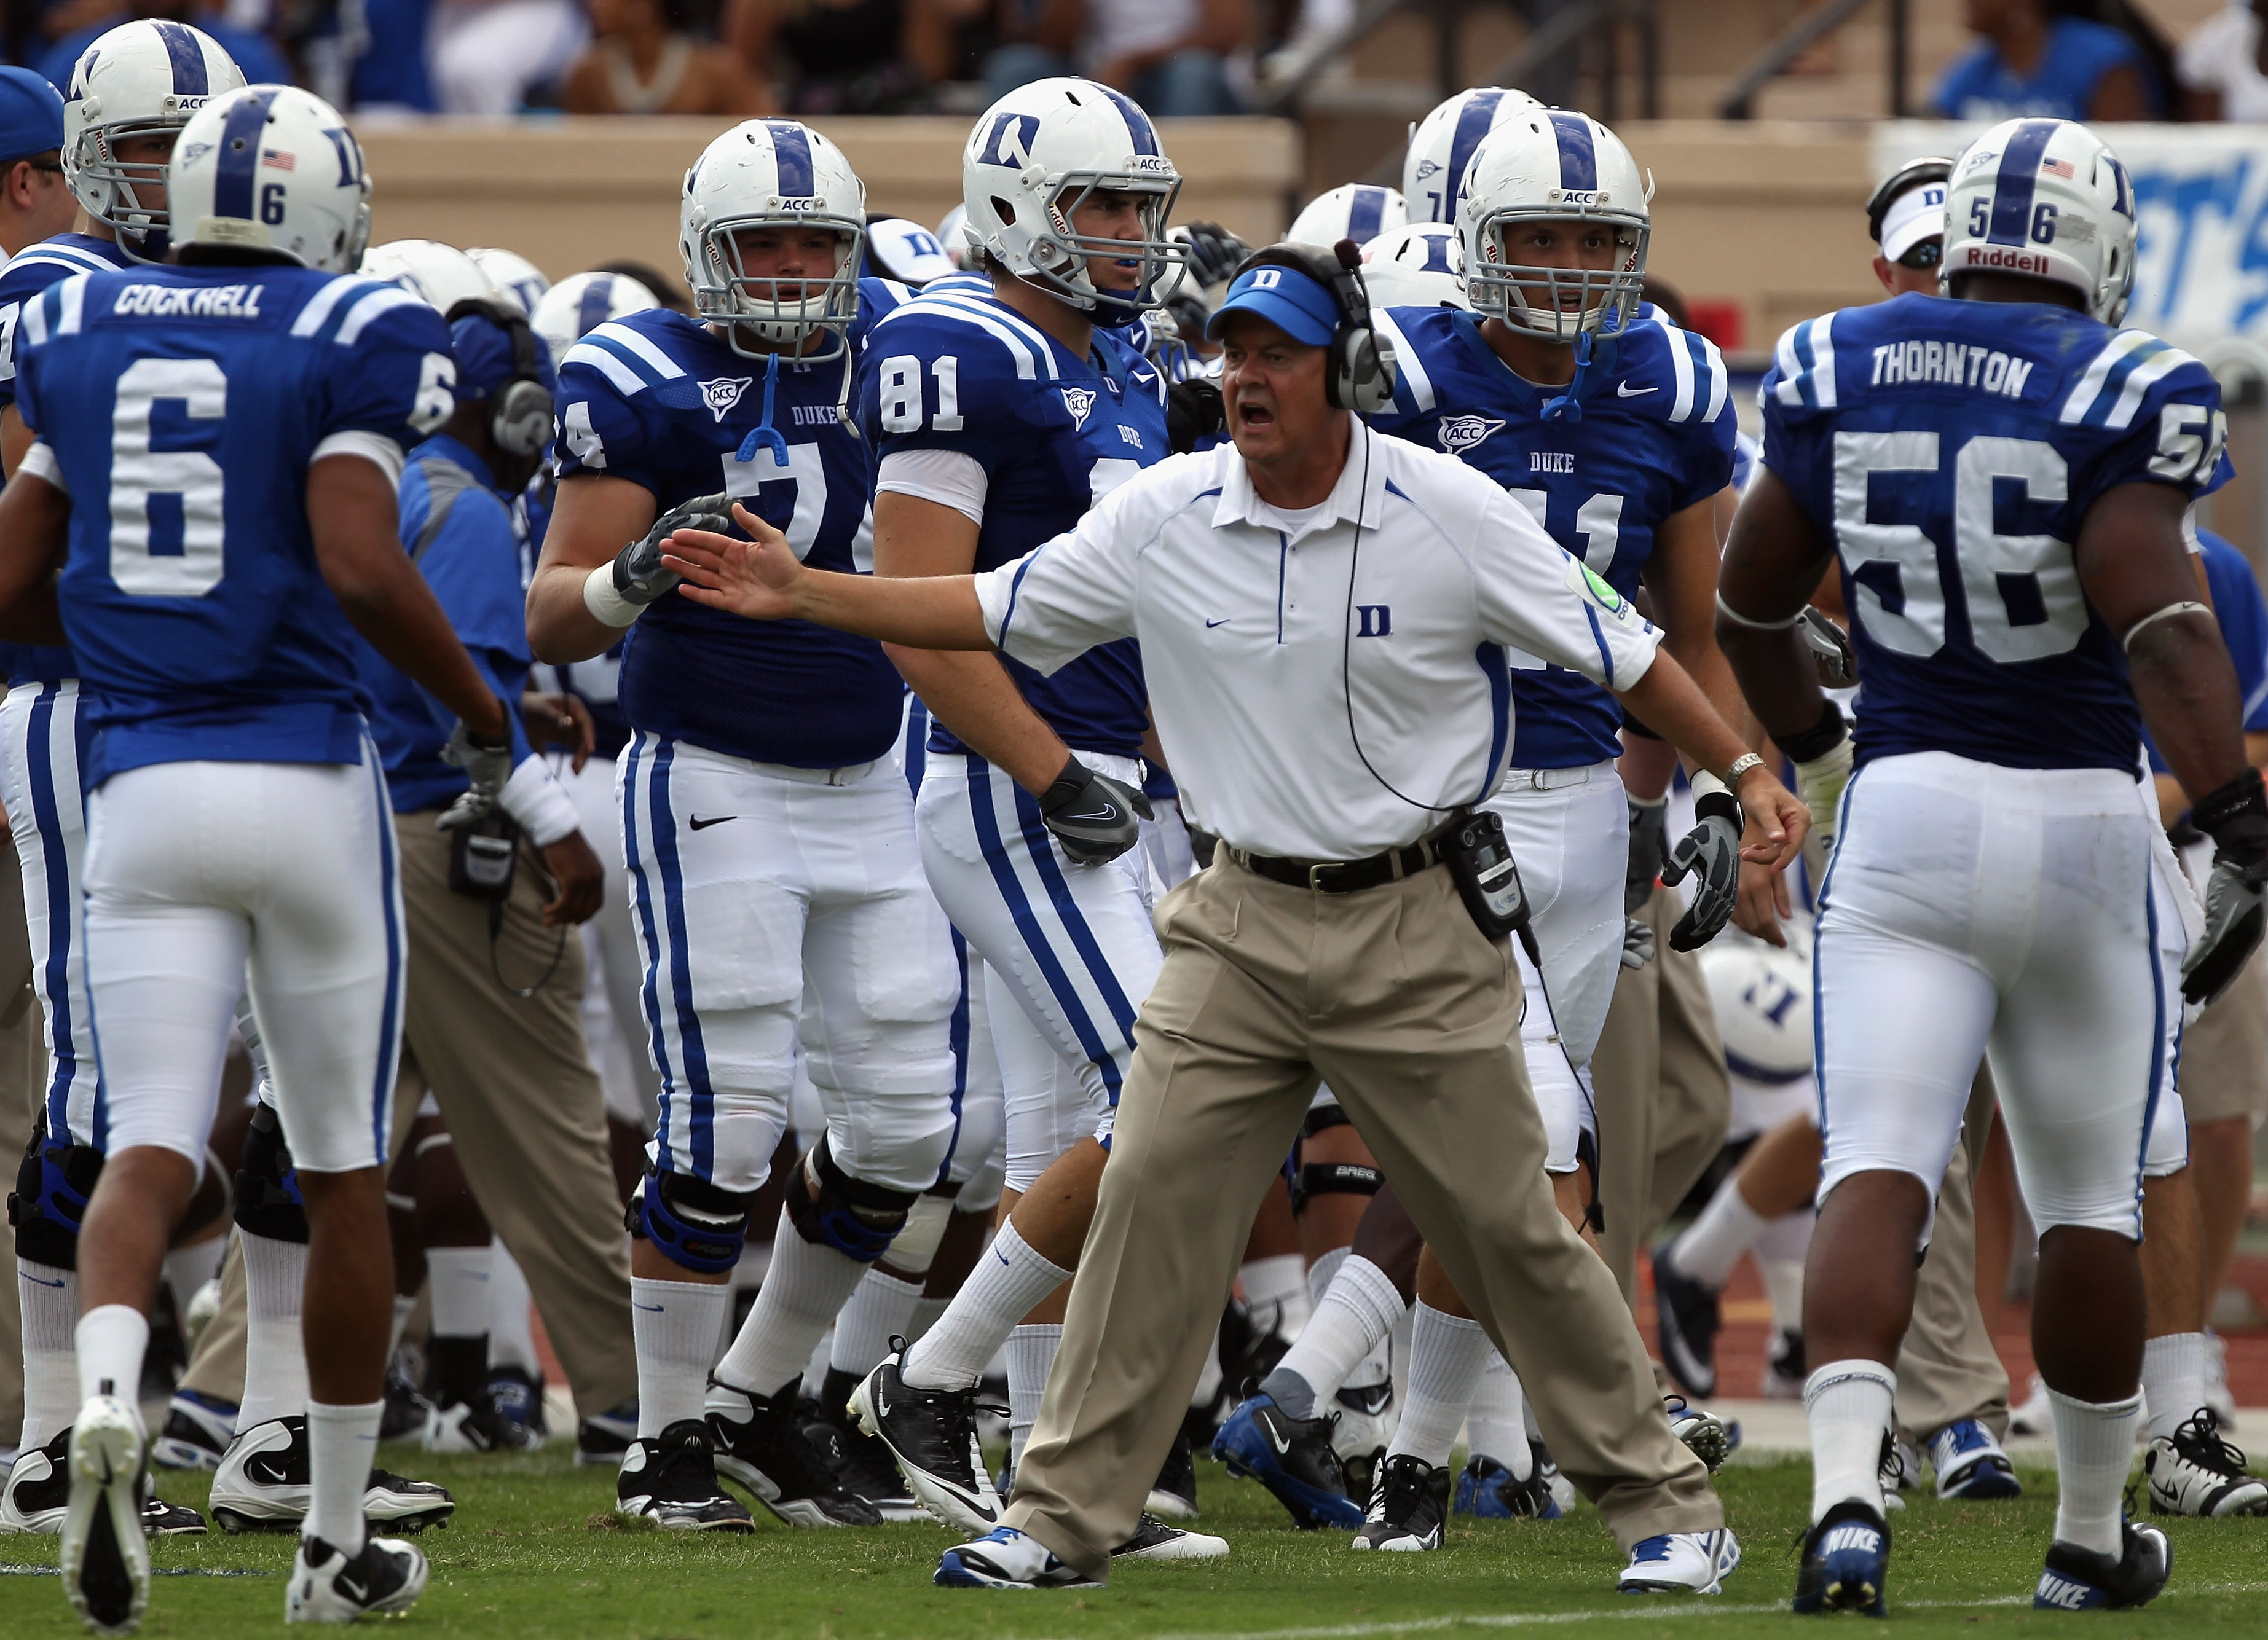 DURHAM, NC - SEPTEMBER 25:  Head coach David Cutcliffe of the Duke Blue Devils cheers on his team the Army Black Knights at Wallace Wade Stadium on September 25, 2010 in Durham, North Carolina.  (Photo by Streeter Lecka/Getty Images)